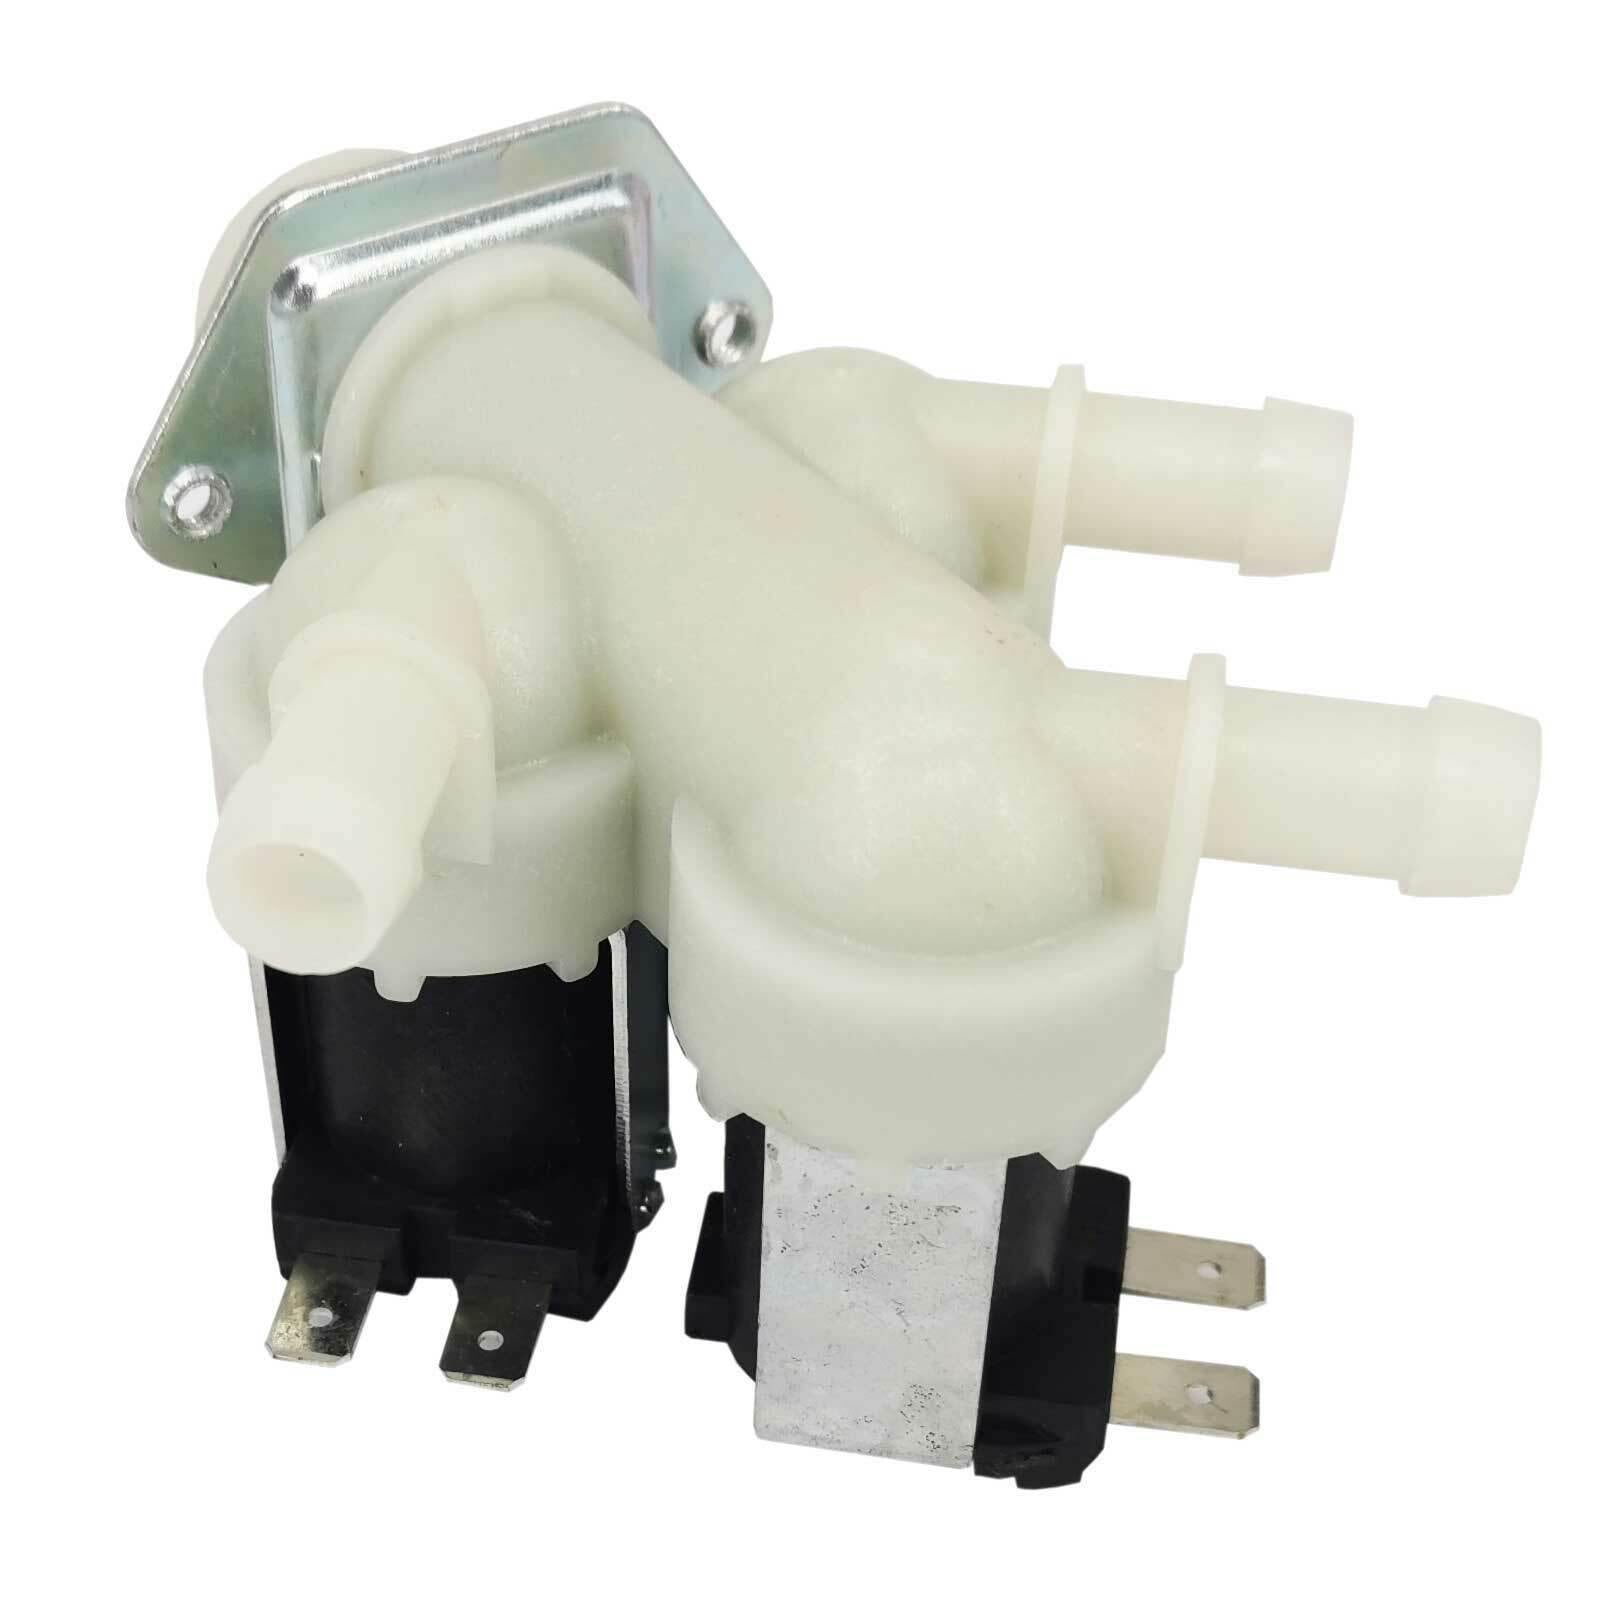 Washing Machine Triple Inlet Valve For LG FR2922NCZB WD-1227RD WD-1290RD 3 Way Sparesbarn